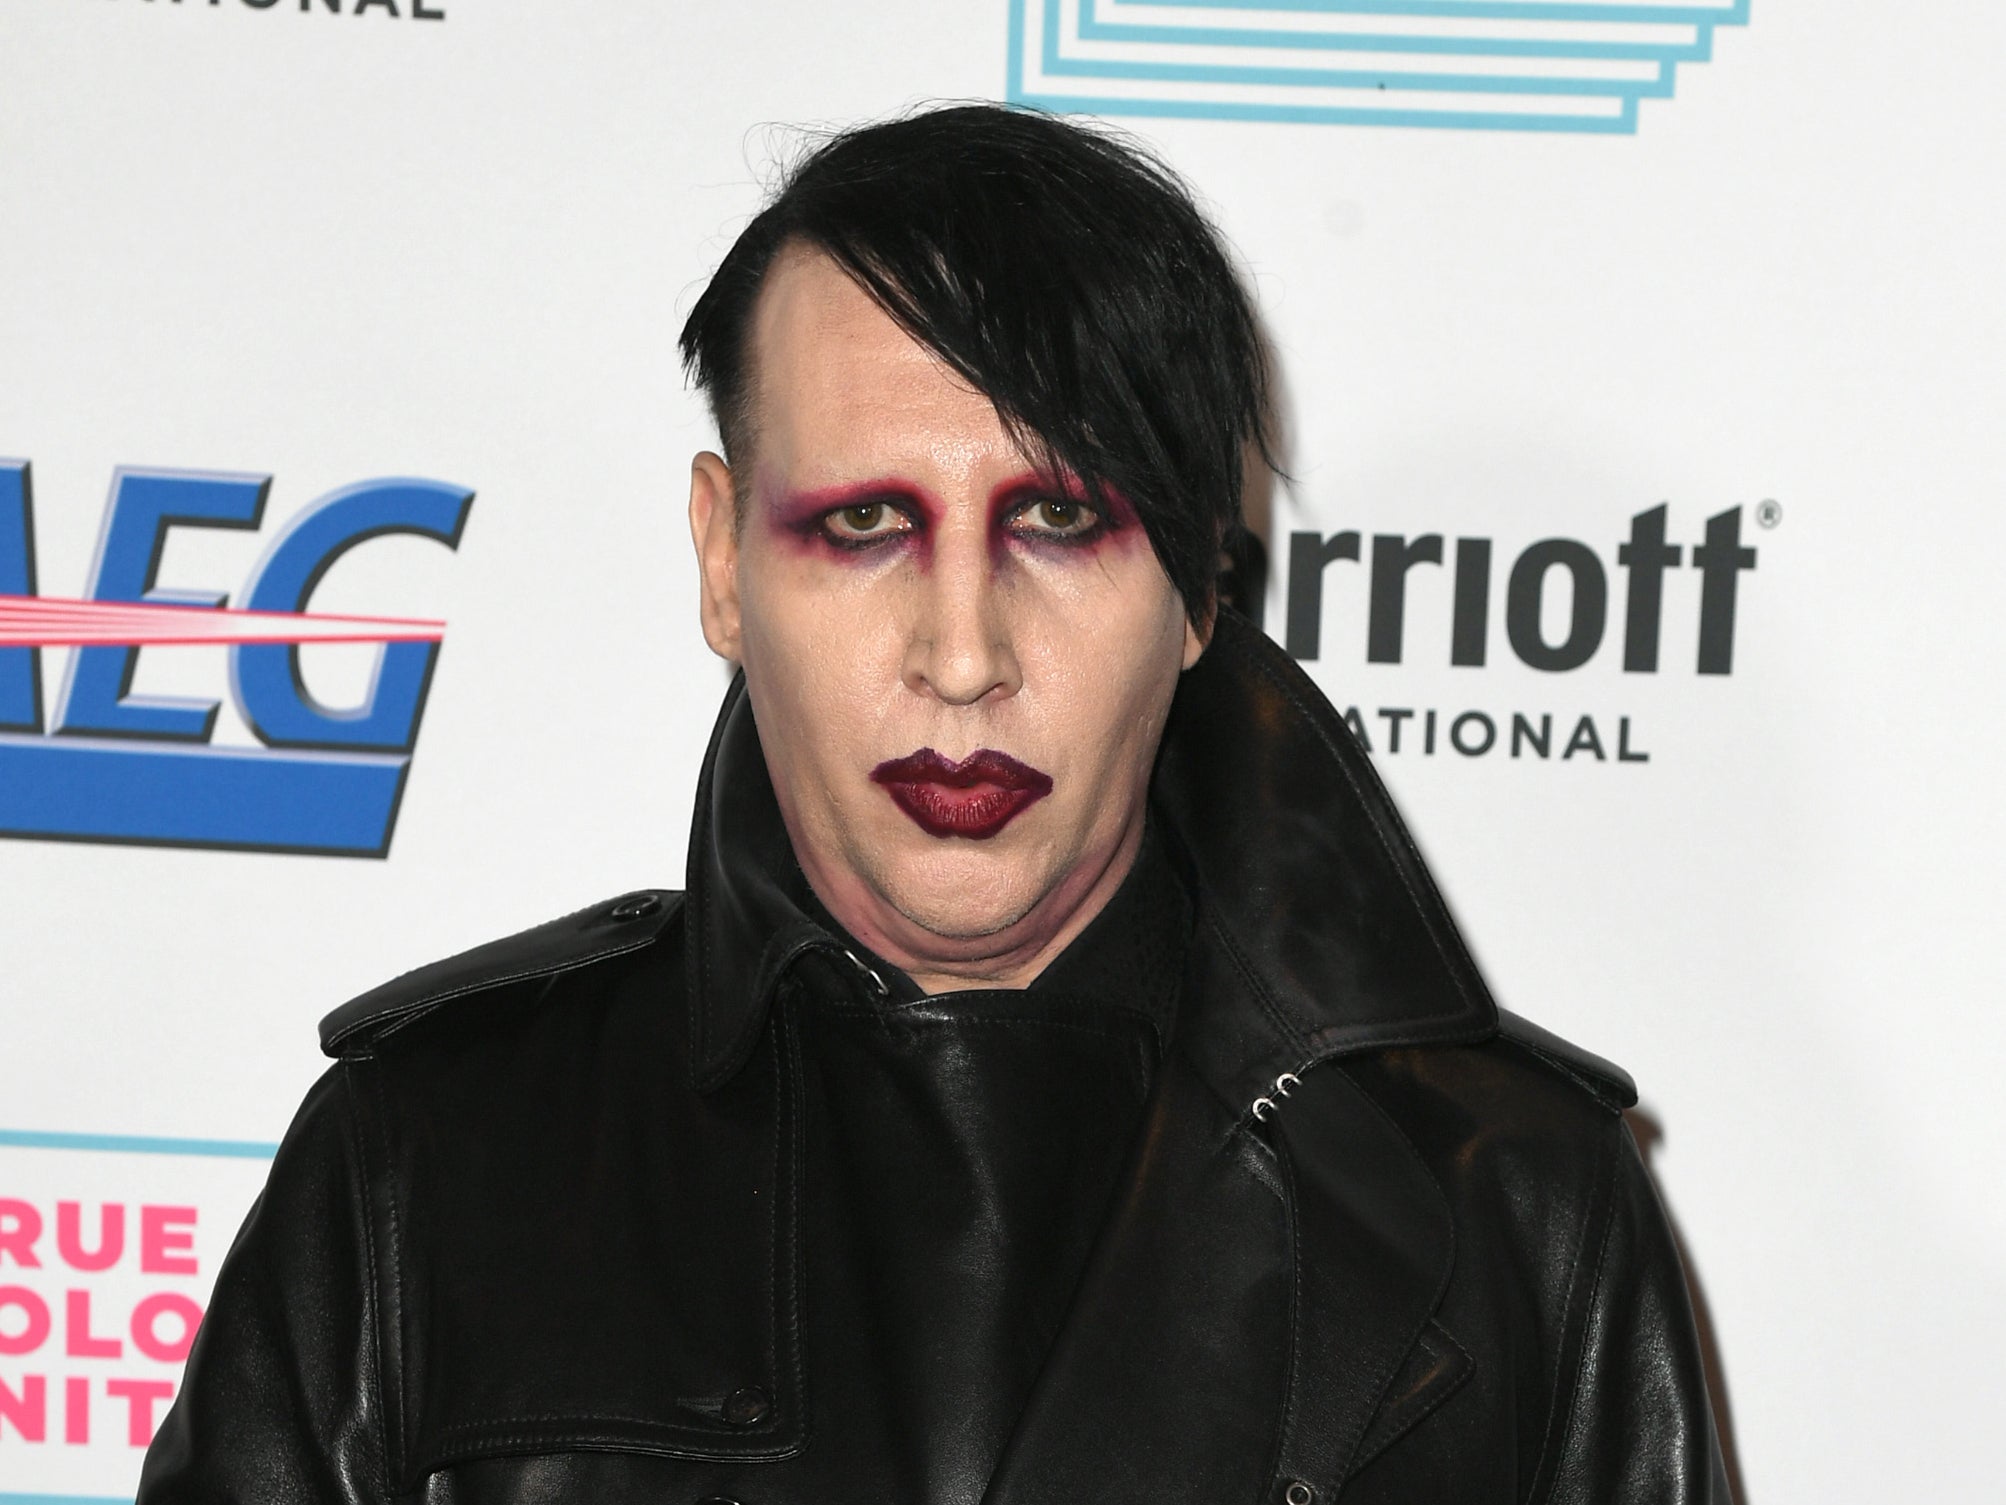 Singer Marilyn Manson dropped by record label after abuse claims